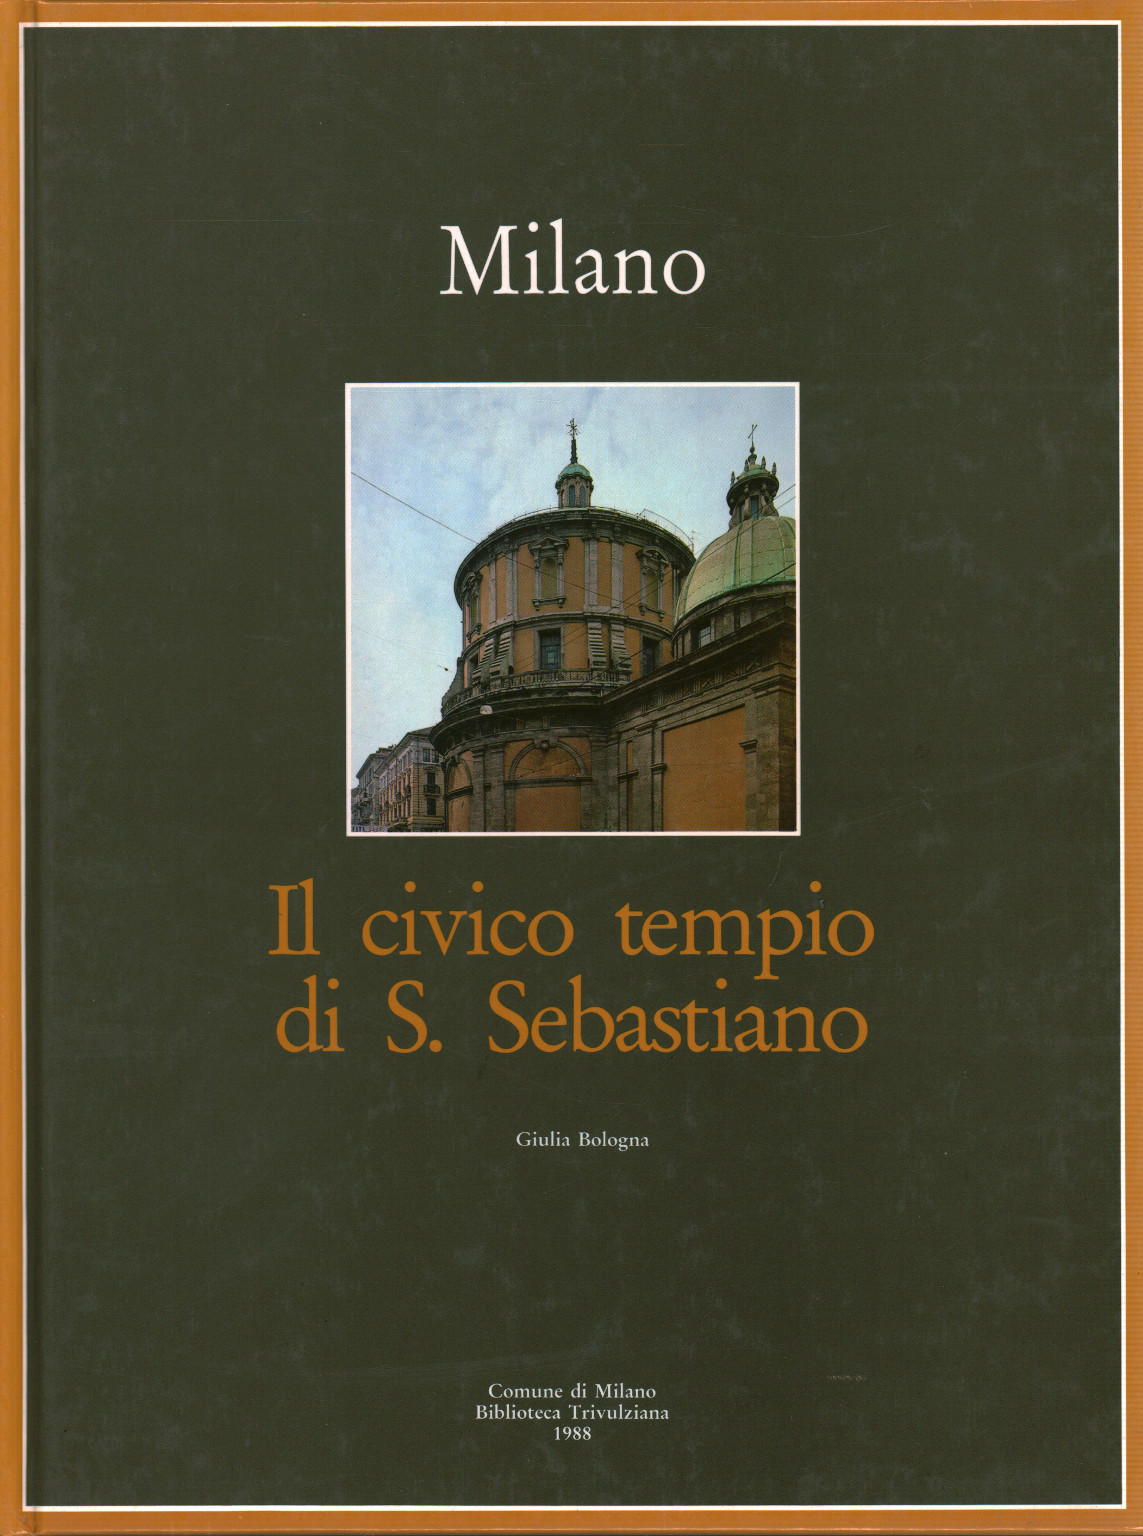 Milan. The civic temple of S. Sebastiano, s.a.